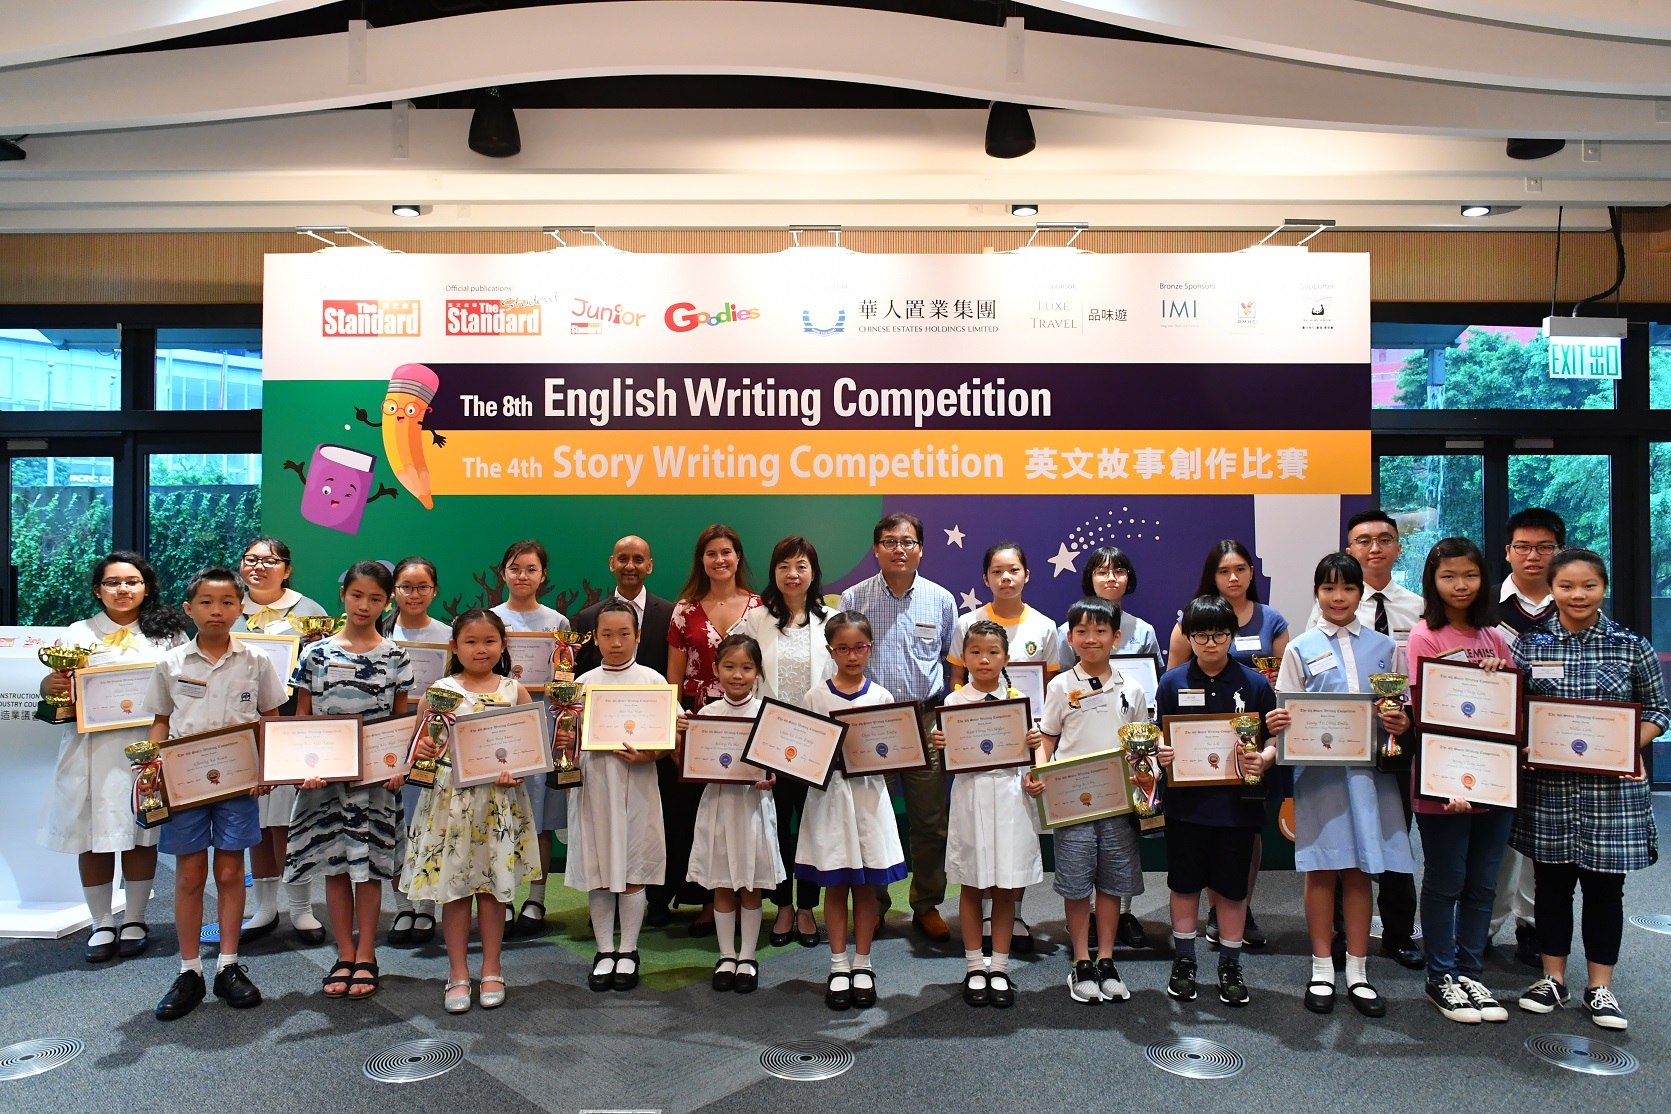 The Standard Hosts the "4th Story Writing Competition and 8th English Writing Competition" Award Ceremony